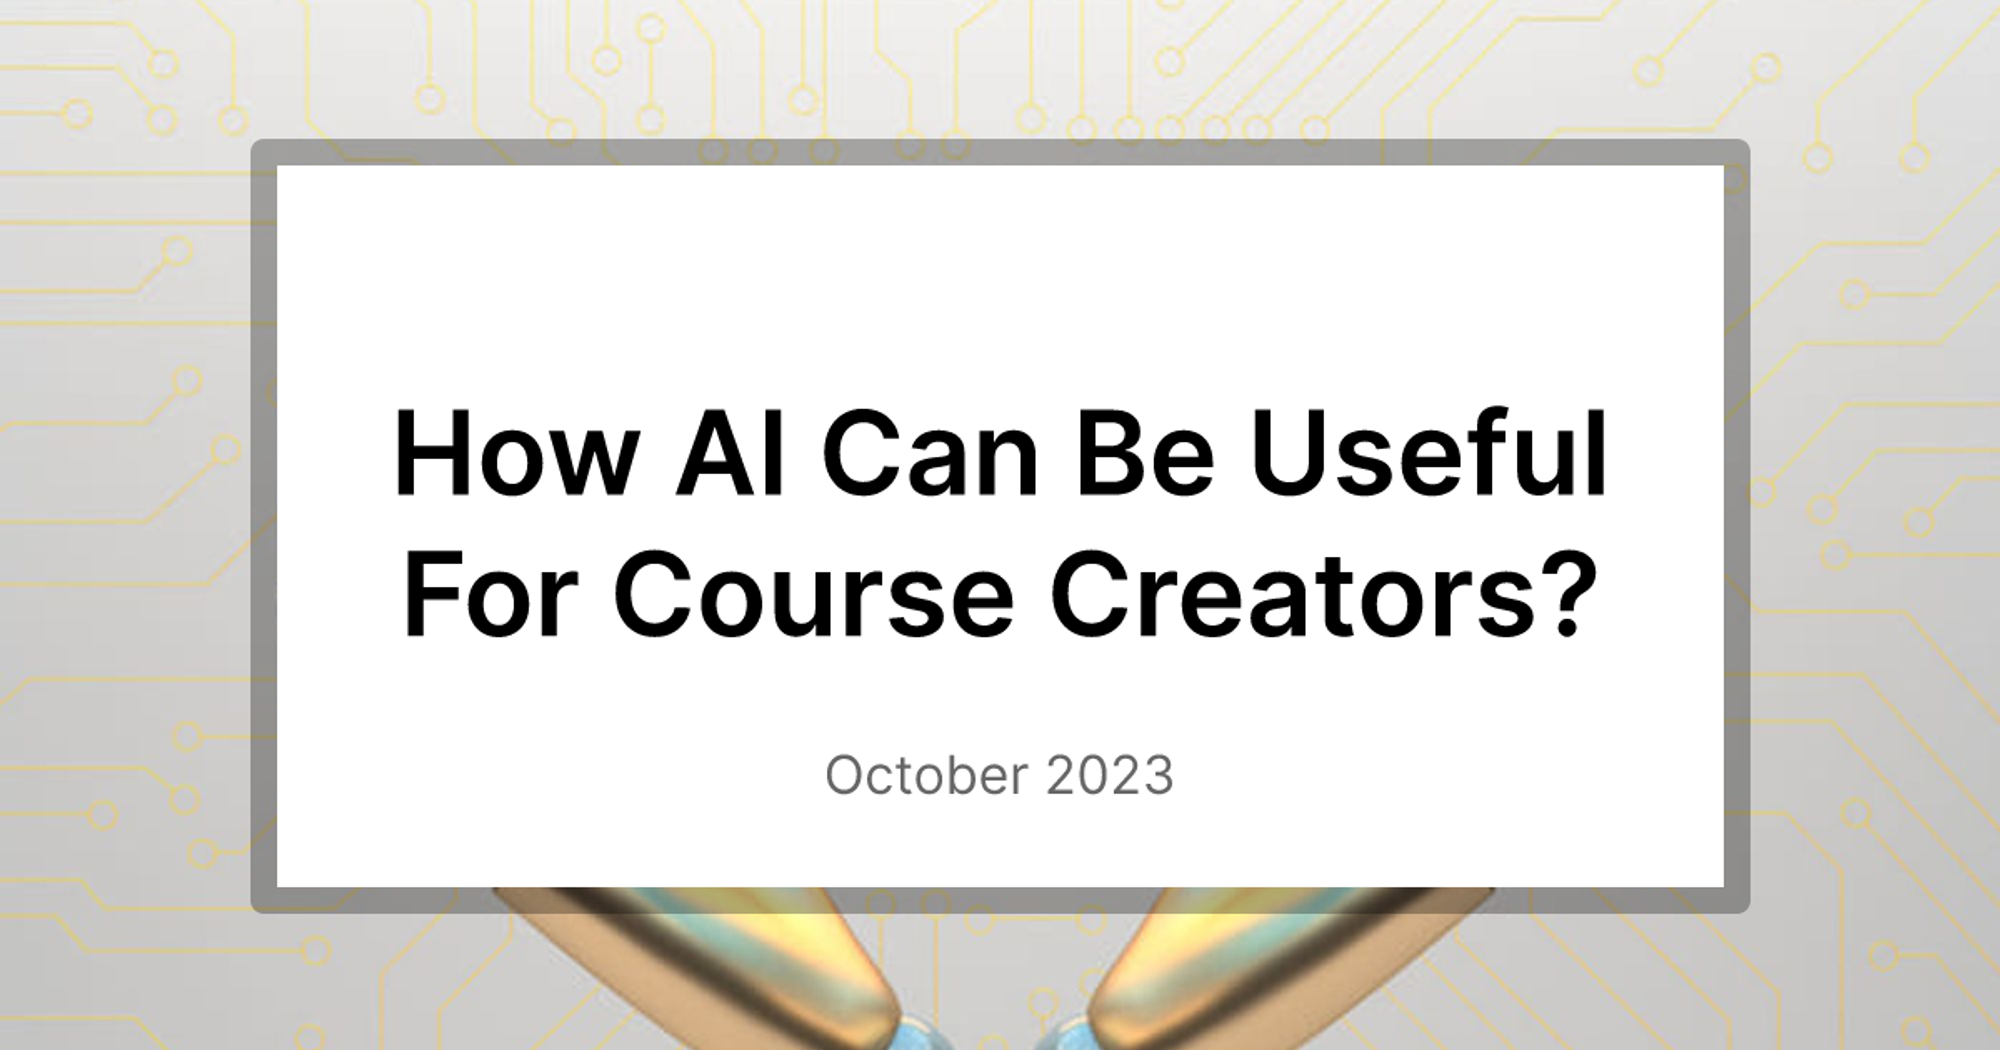 How AI Can Be Useful For Course Creators?